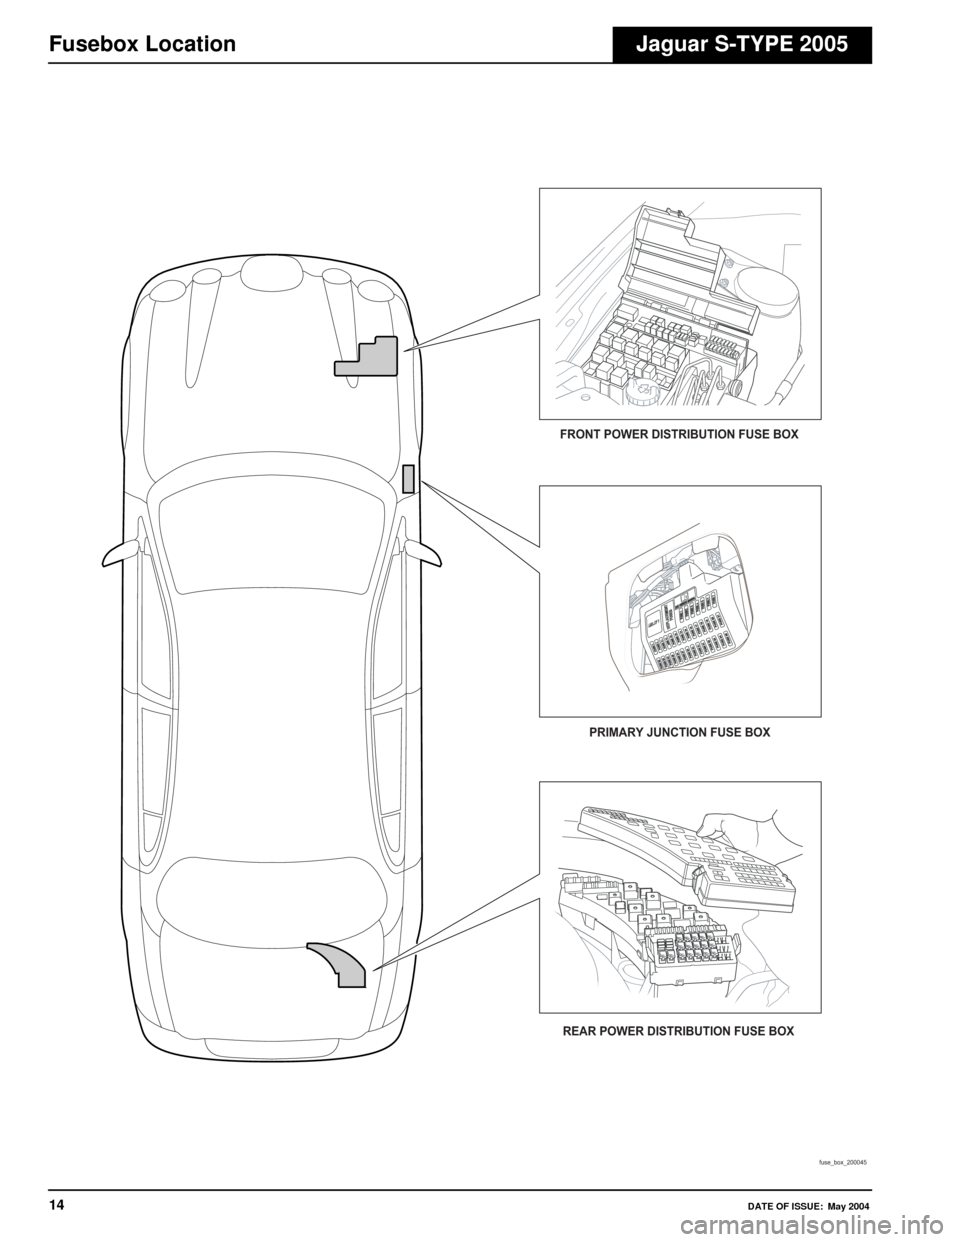 JAGUAR S TYPE 2005 1.G Electrical Manual 
14DATE OF ISSUE: May 2004
Fusebox LocationJaguar S-TYPE 2005
FRONT POWER DISTRIBUTION FUSE BOXPRIMARY JUNCTION FUSE BOX
REAR POWER DISTRIBUTION FUSE BOX
fuse_box_200045 